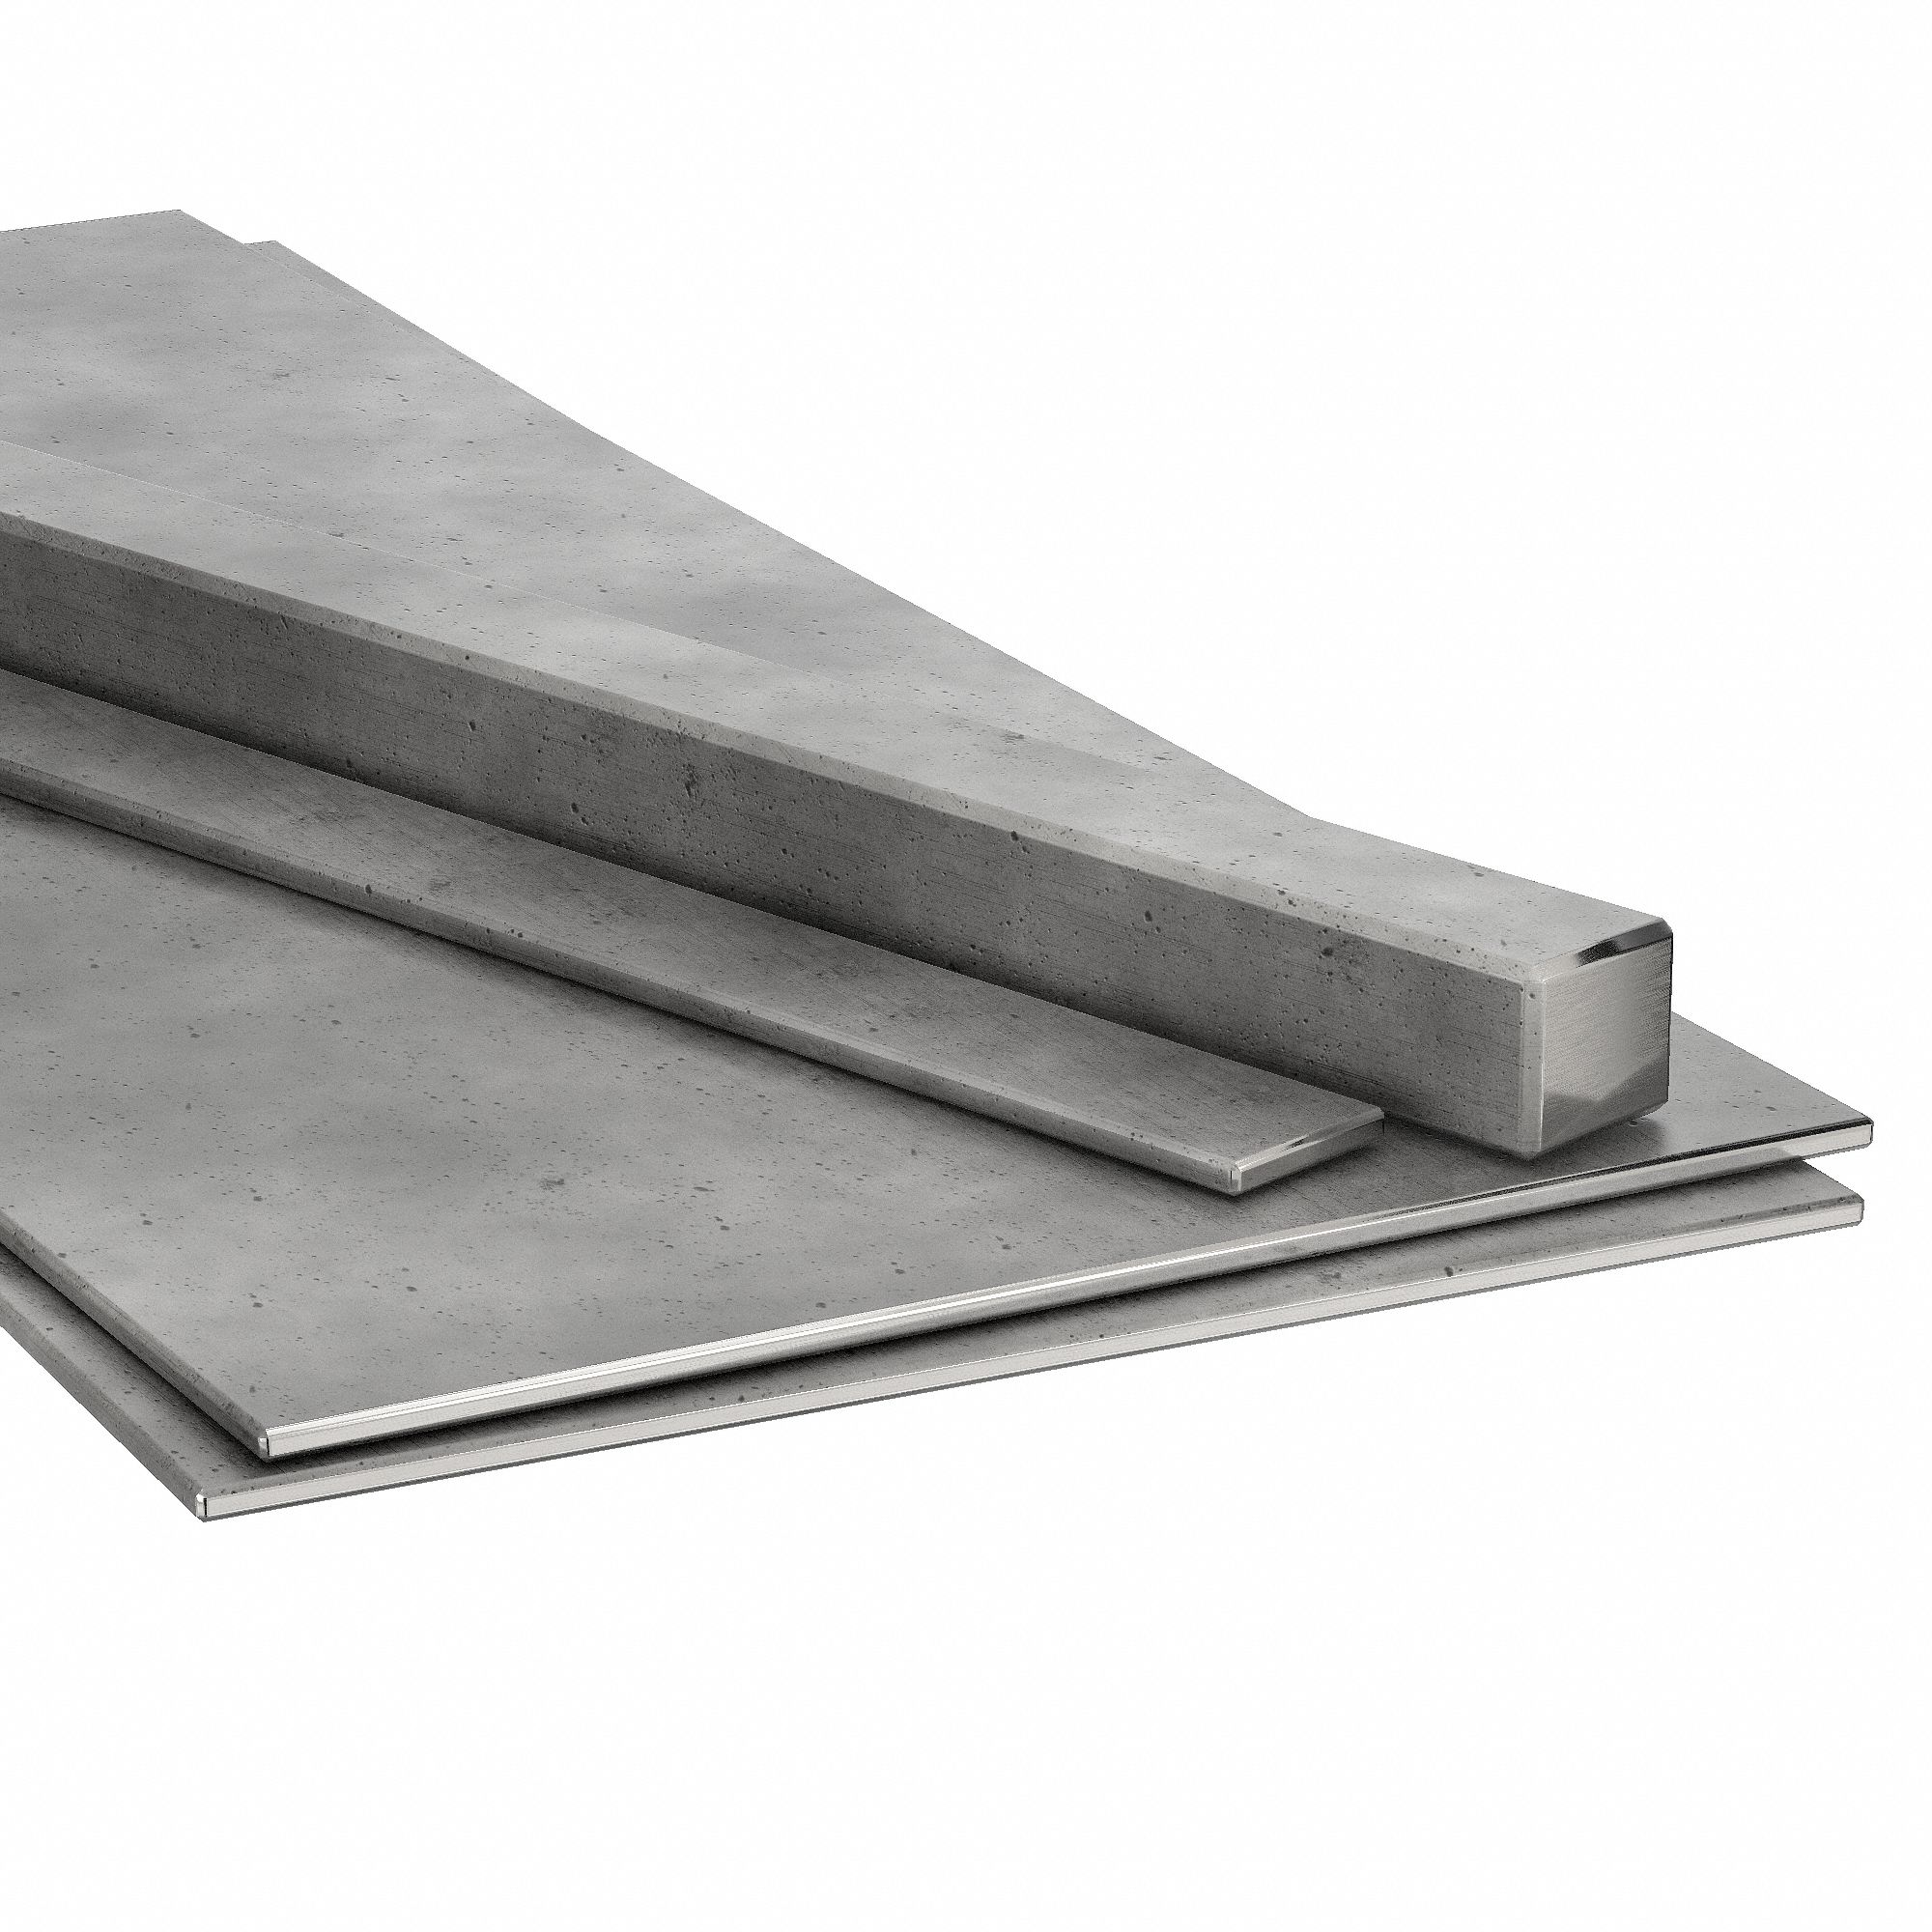 1in x 48in x 1/4in Steel Flat Plate 0.25in Thick 